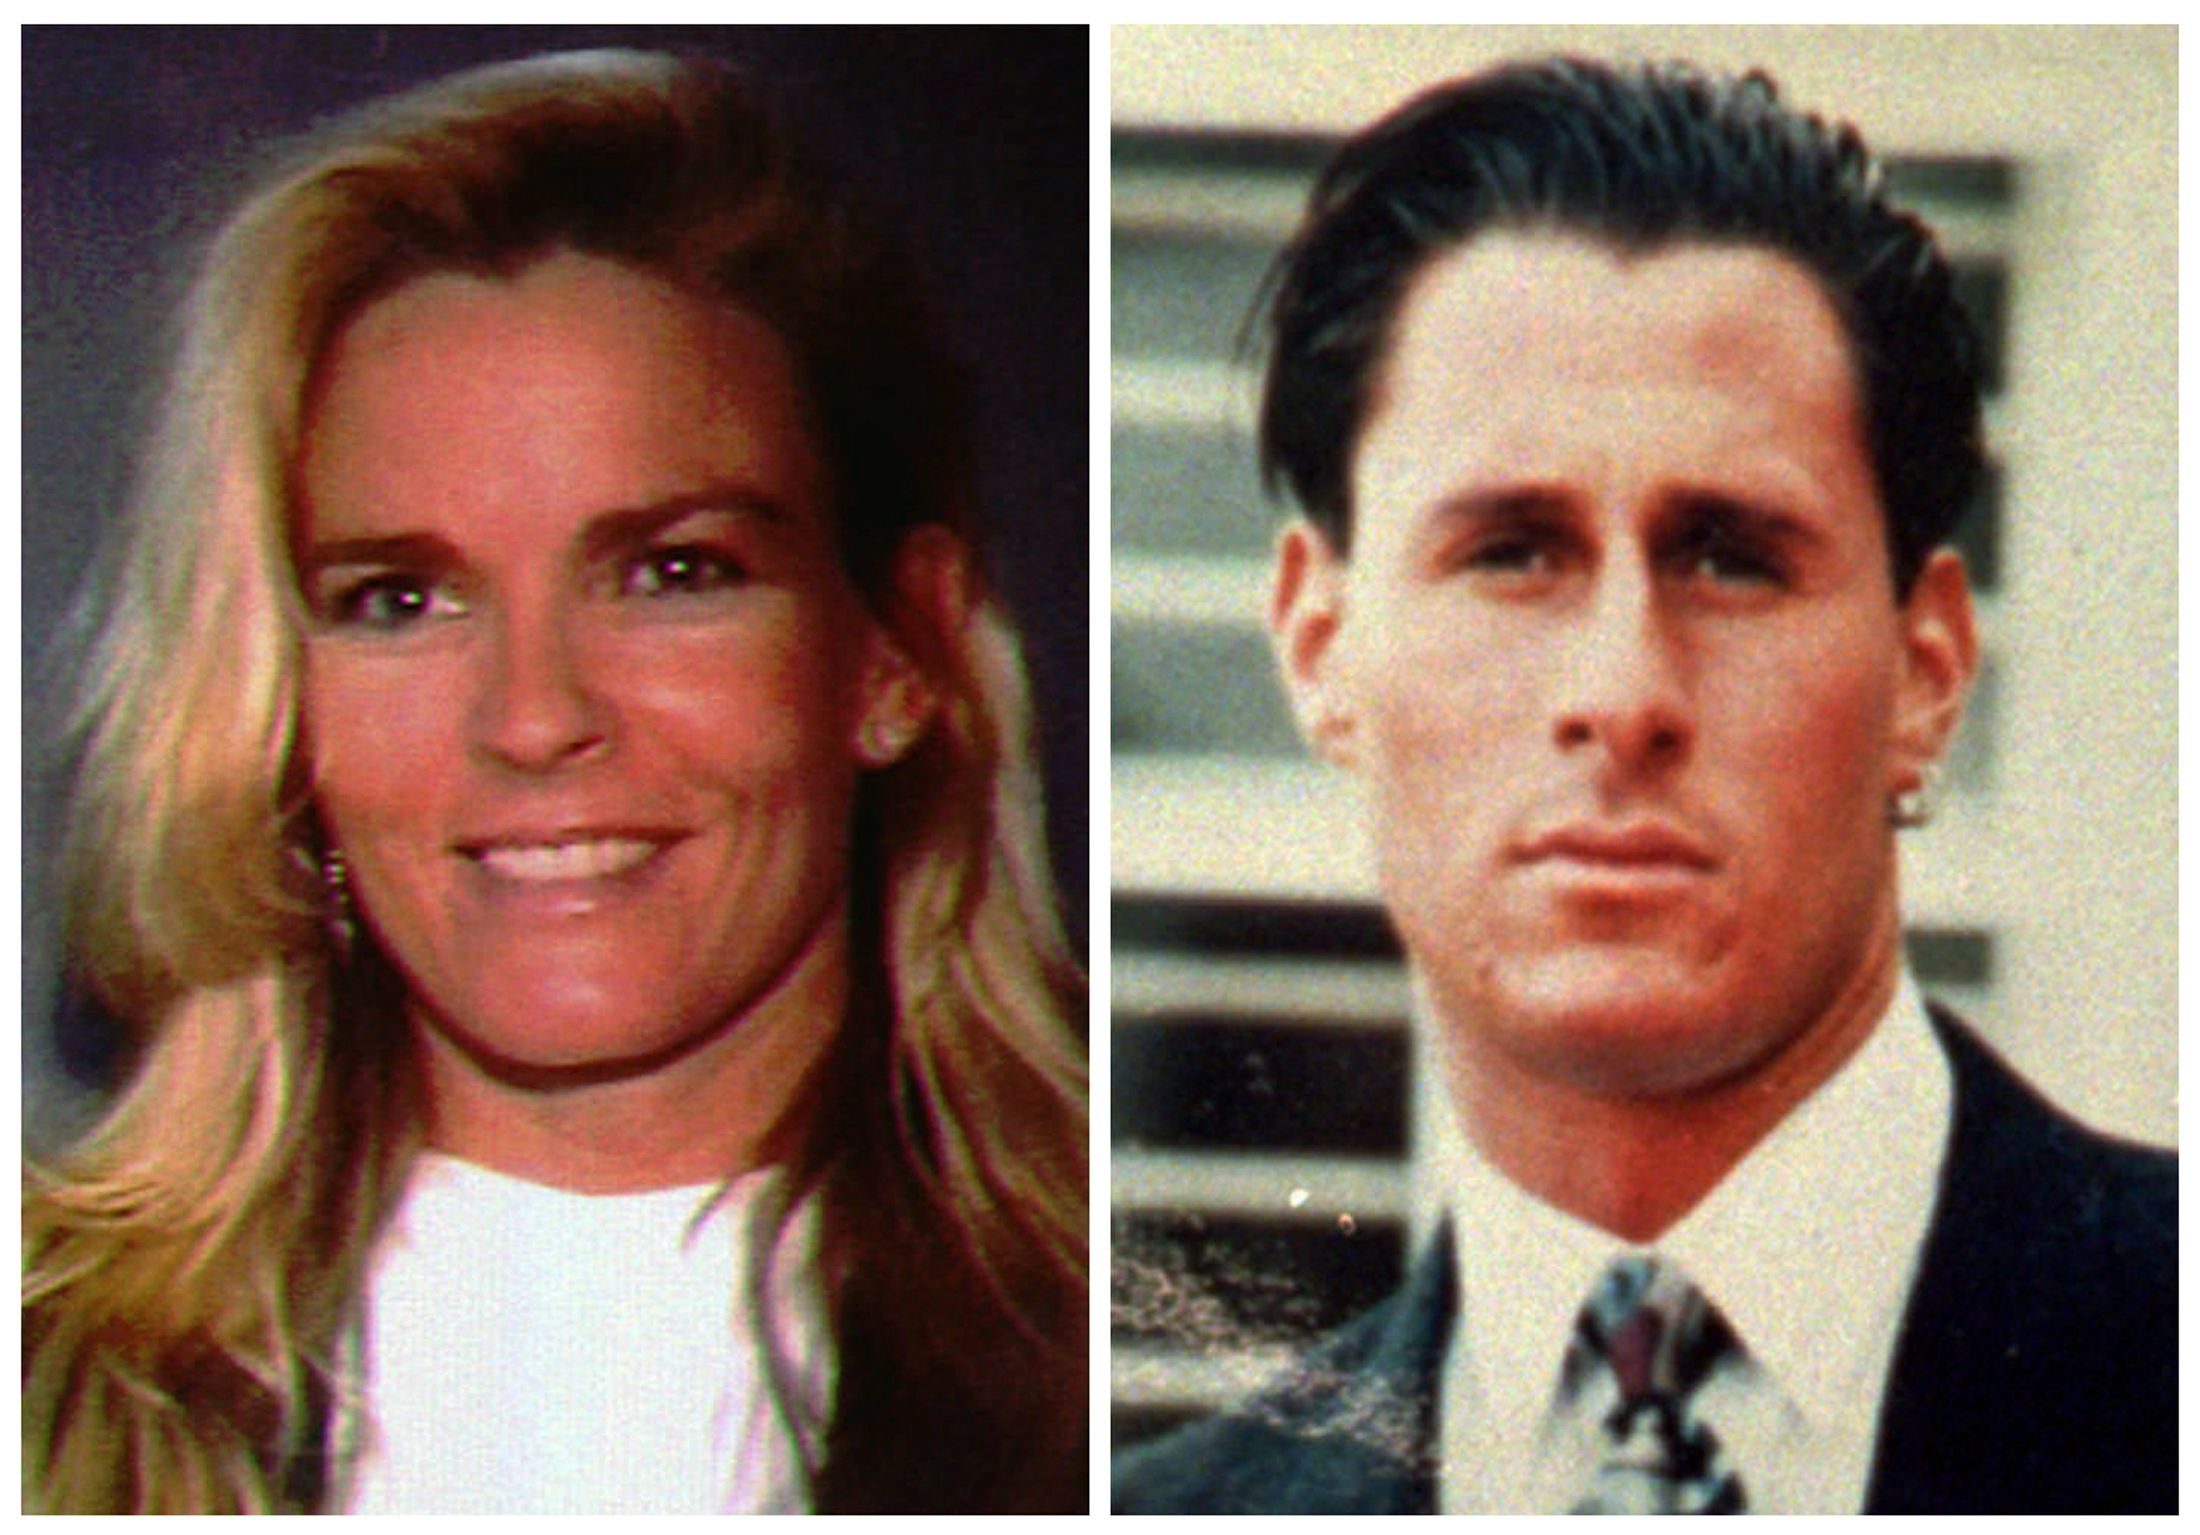 Nicole Brown Simpson, Ron Goldman This file combo photo shows Nicole Brown Simpson, left, and her friend Ron Goldman, both of whom were murdered and found dead in Los Angeles on . Hall of Fame football star O.J. Simpson was charged with the murders of Nicole and Goldman, but a jury later found him not guilty in what some call the "Trial of the Century